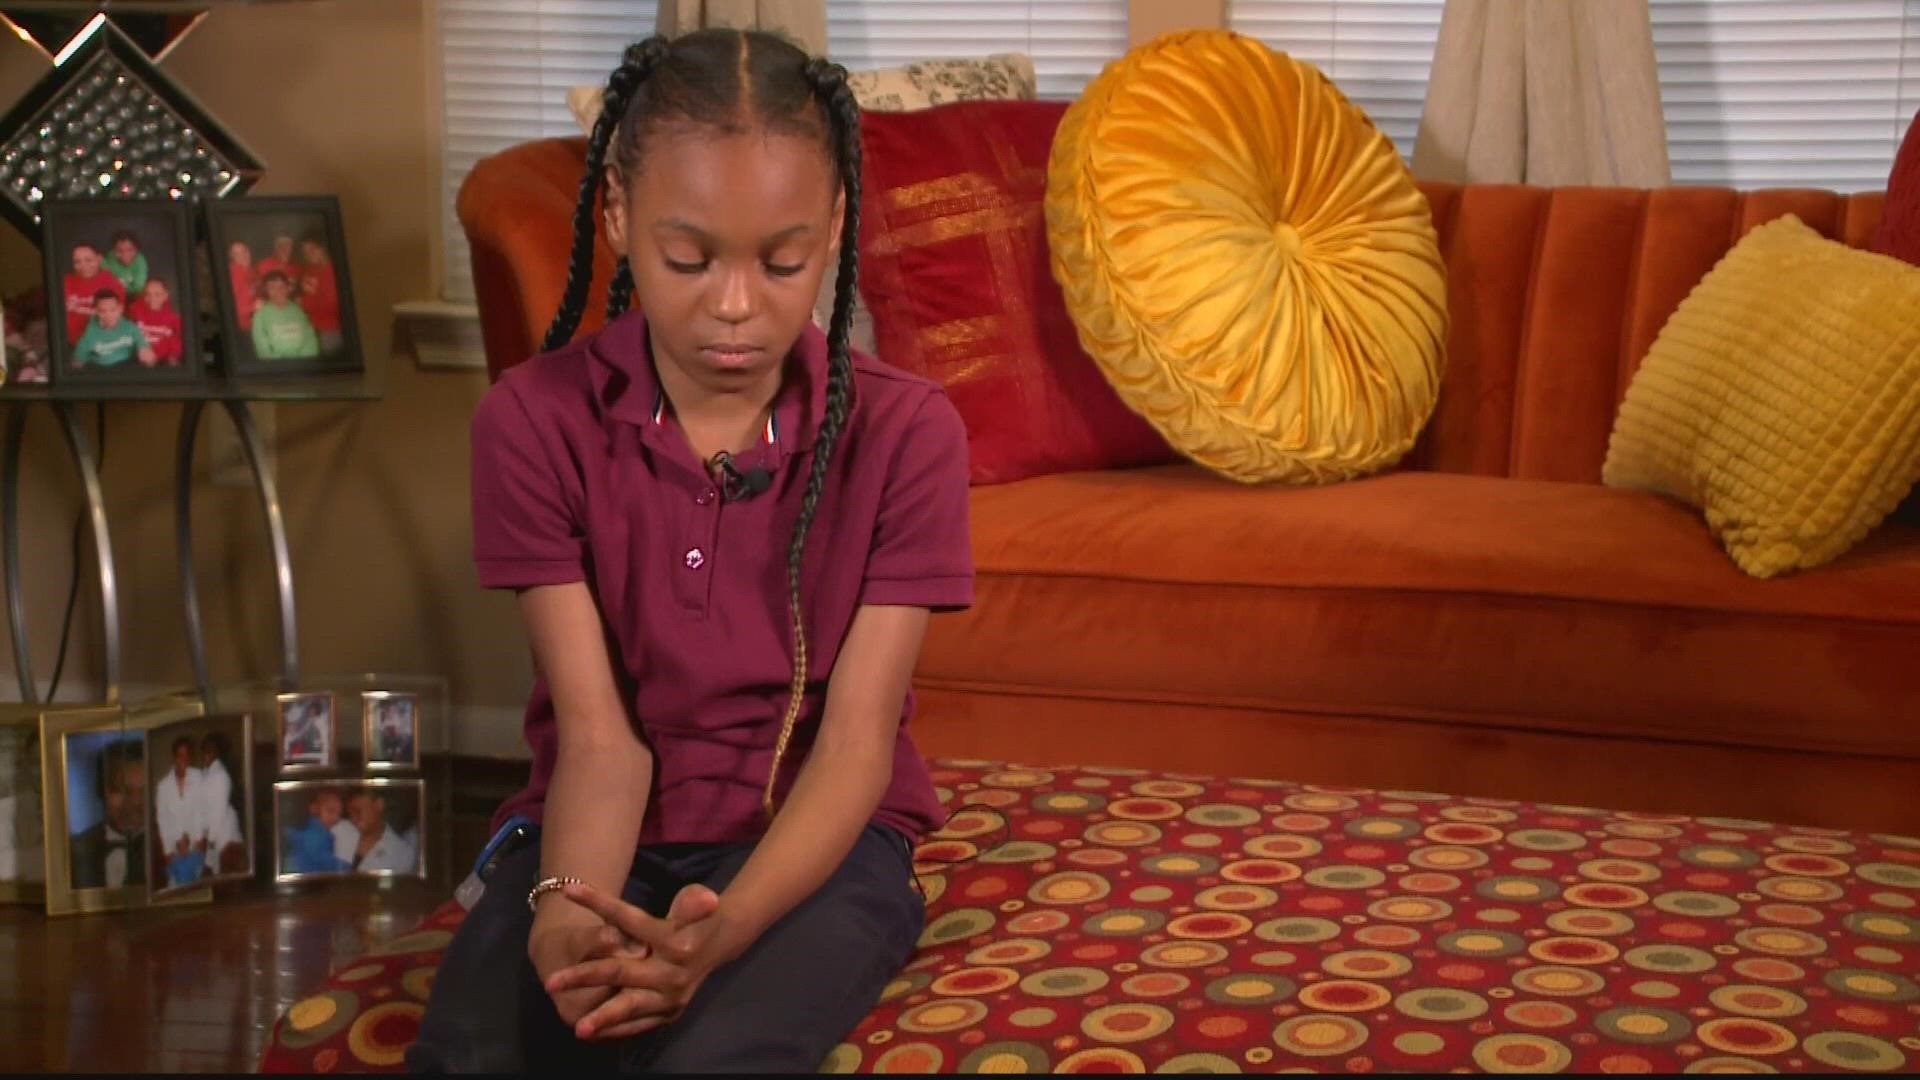 Reagan Grimes, 9, survived being shot in D.C. last year, but she still has a long healing journey ahead of her. It was May 2021, and Reagan was 7 years old.